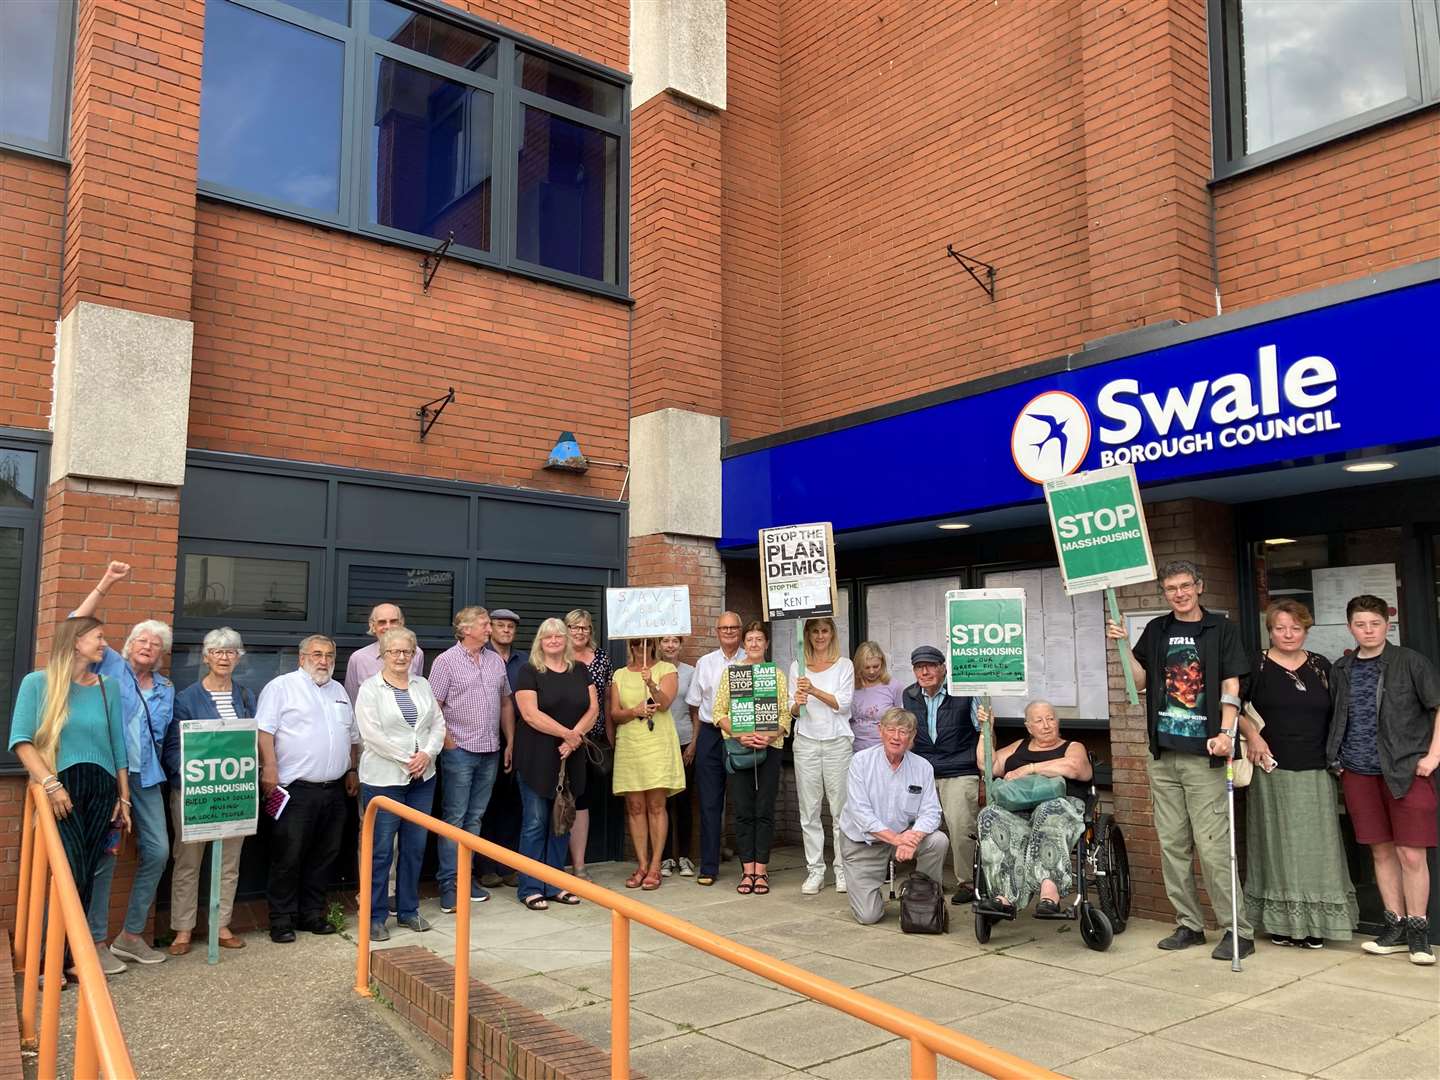 Protestors gathered outside Swale council's offices in Sittingbourne